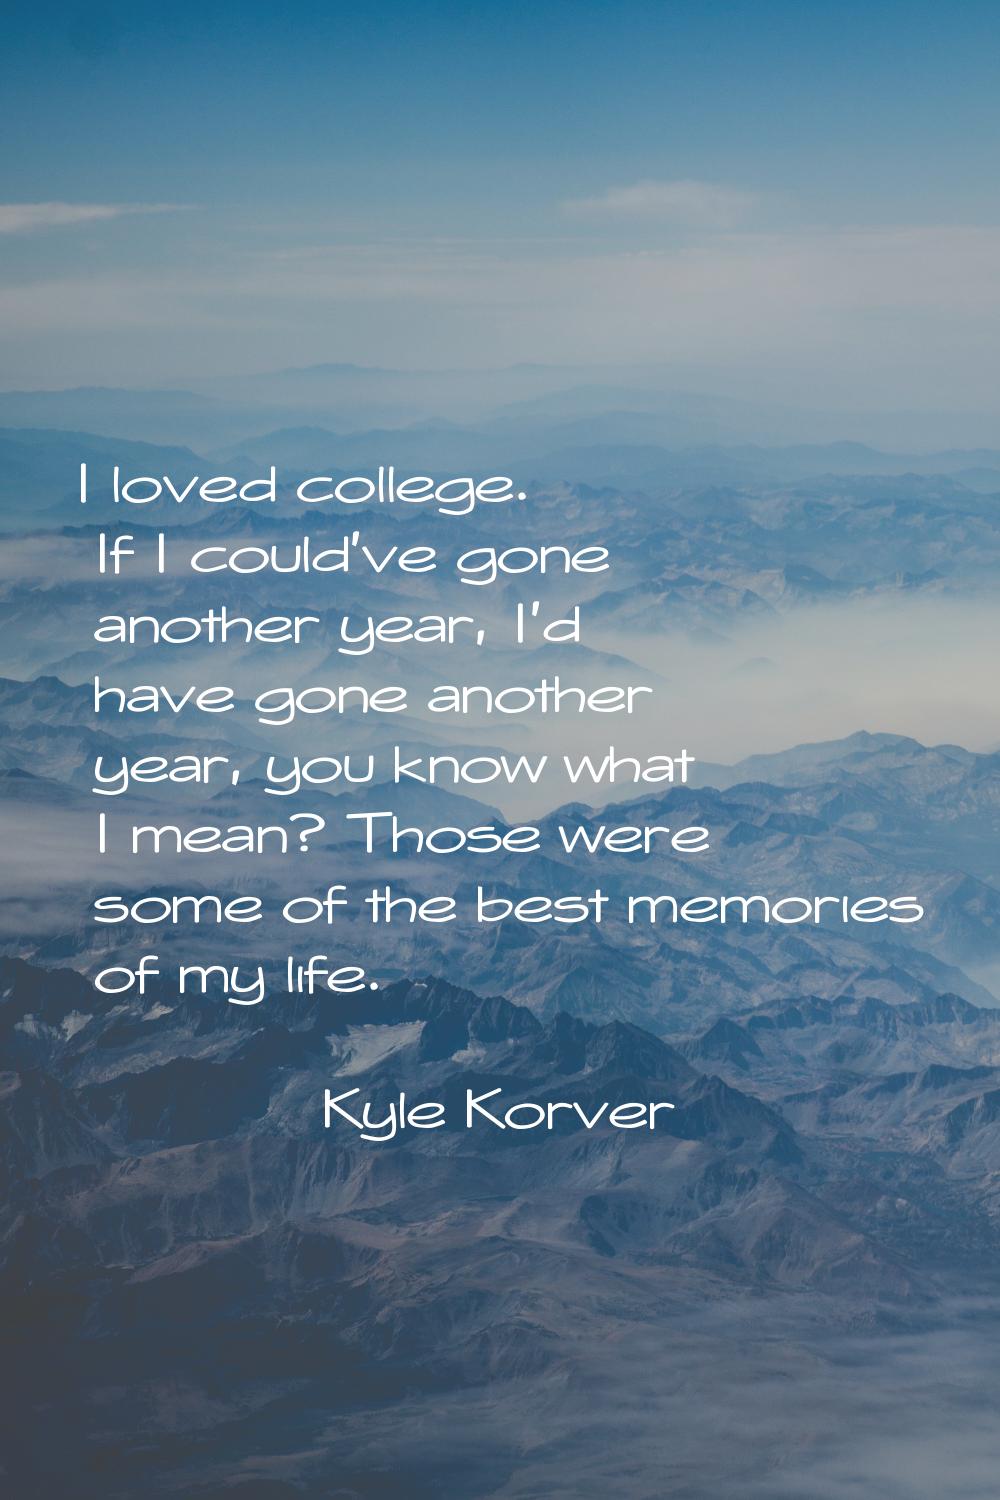 I loved college. If I could've gone another year, I'd have gone another year, you know what I mean?